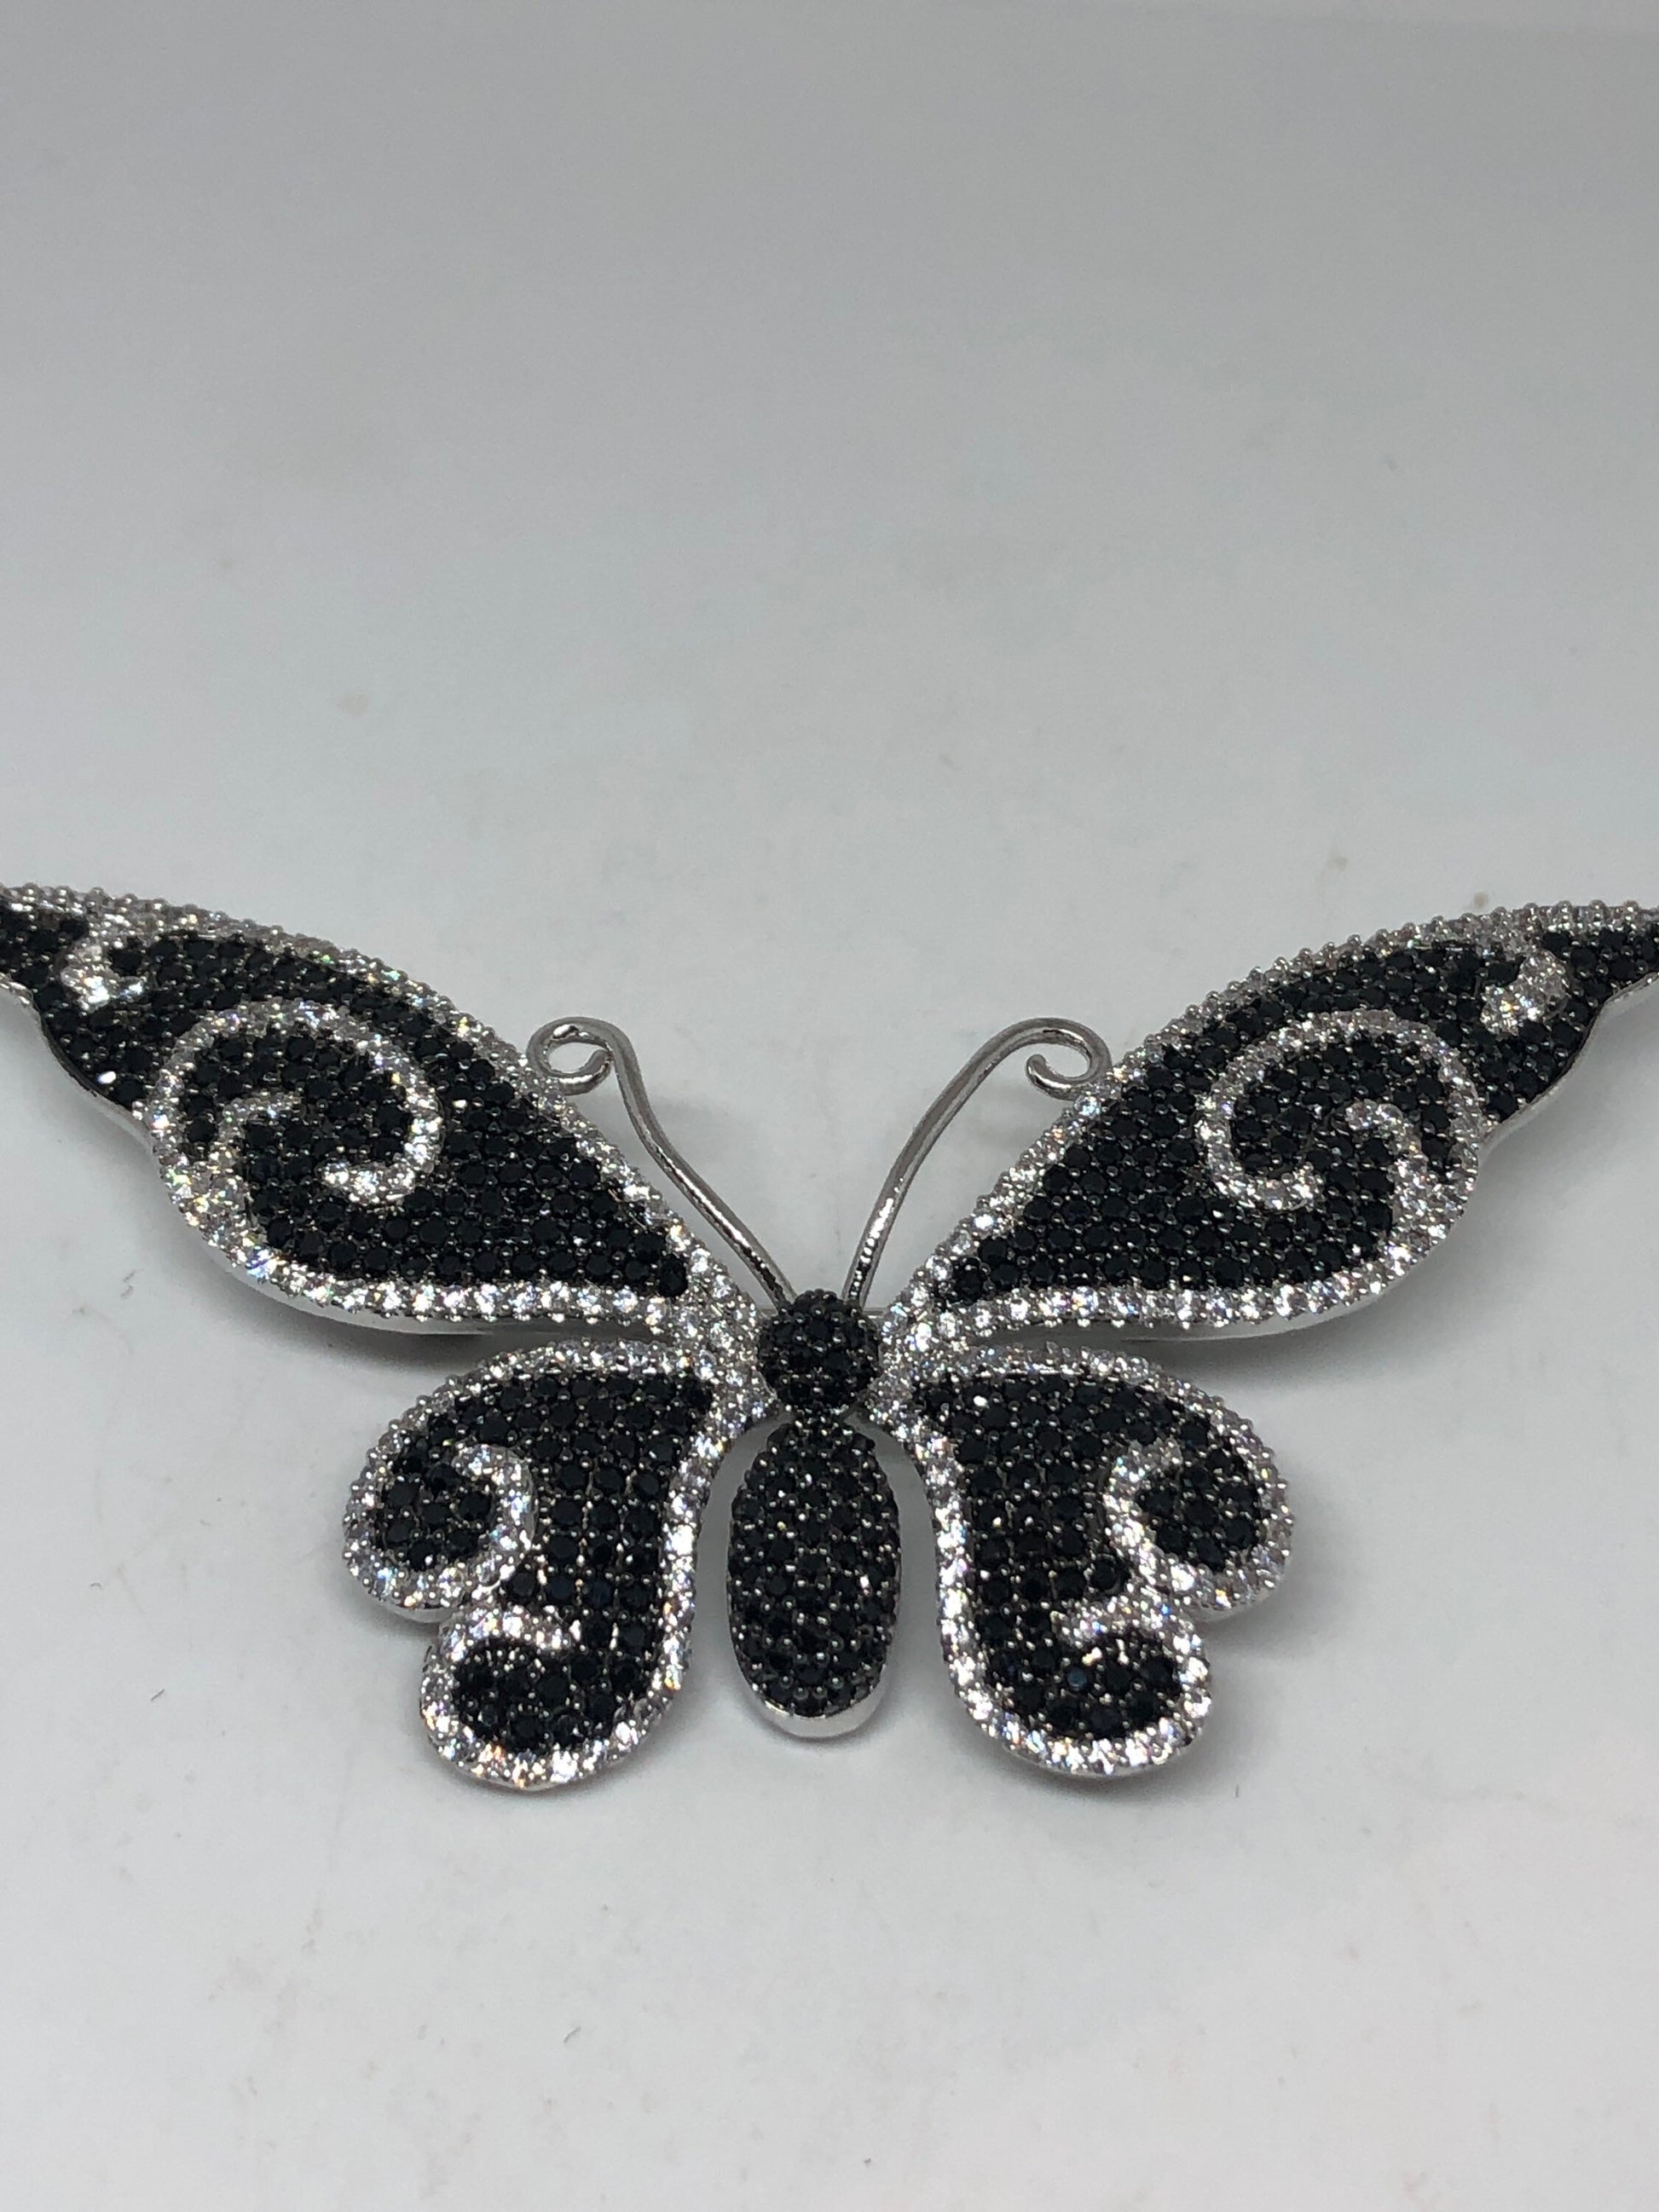 Vintage Black Crystal Gothic Styled Silver Finished Butterfly Broach